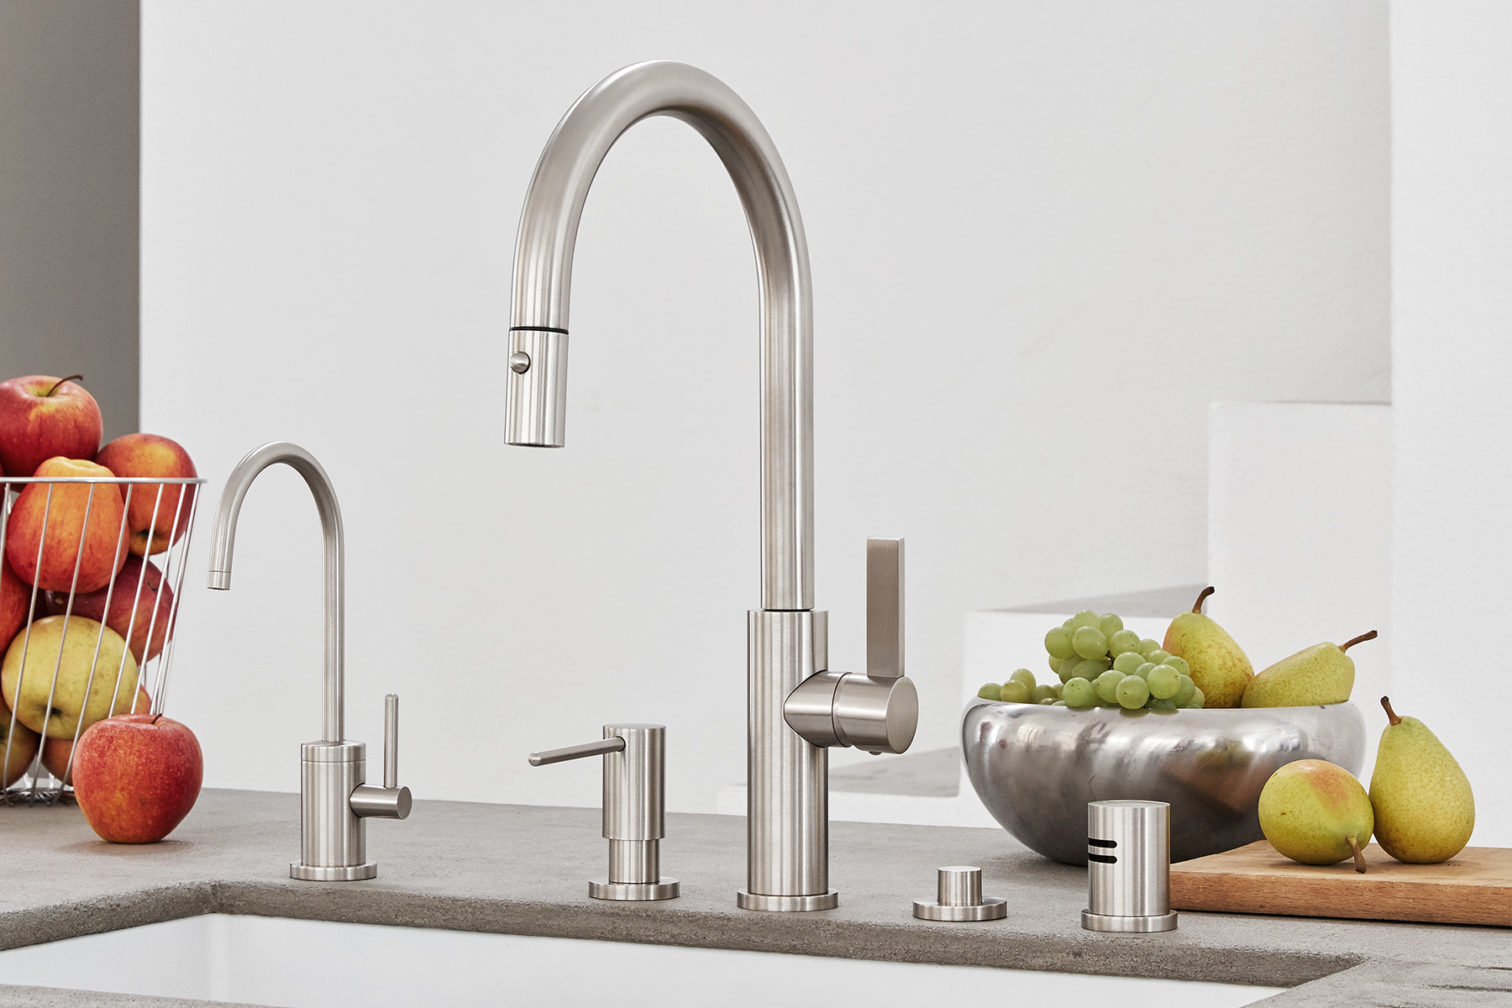 California Faucets Corsano™ Culinary PullOut Kitchen Faucet Wins "Best